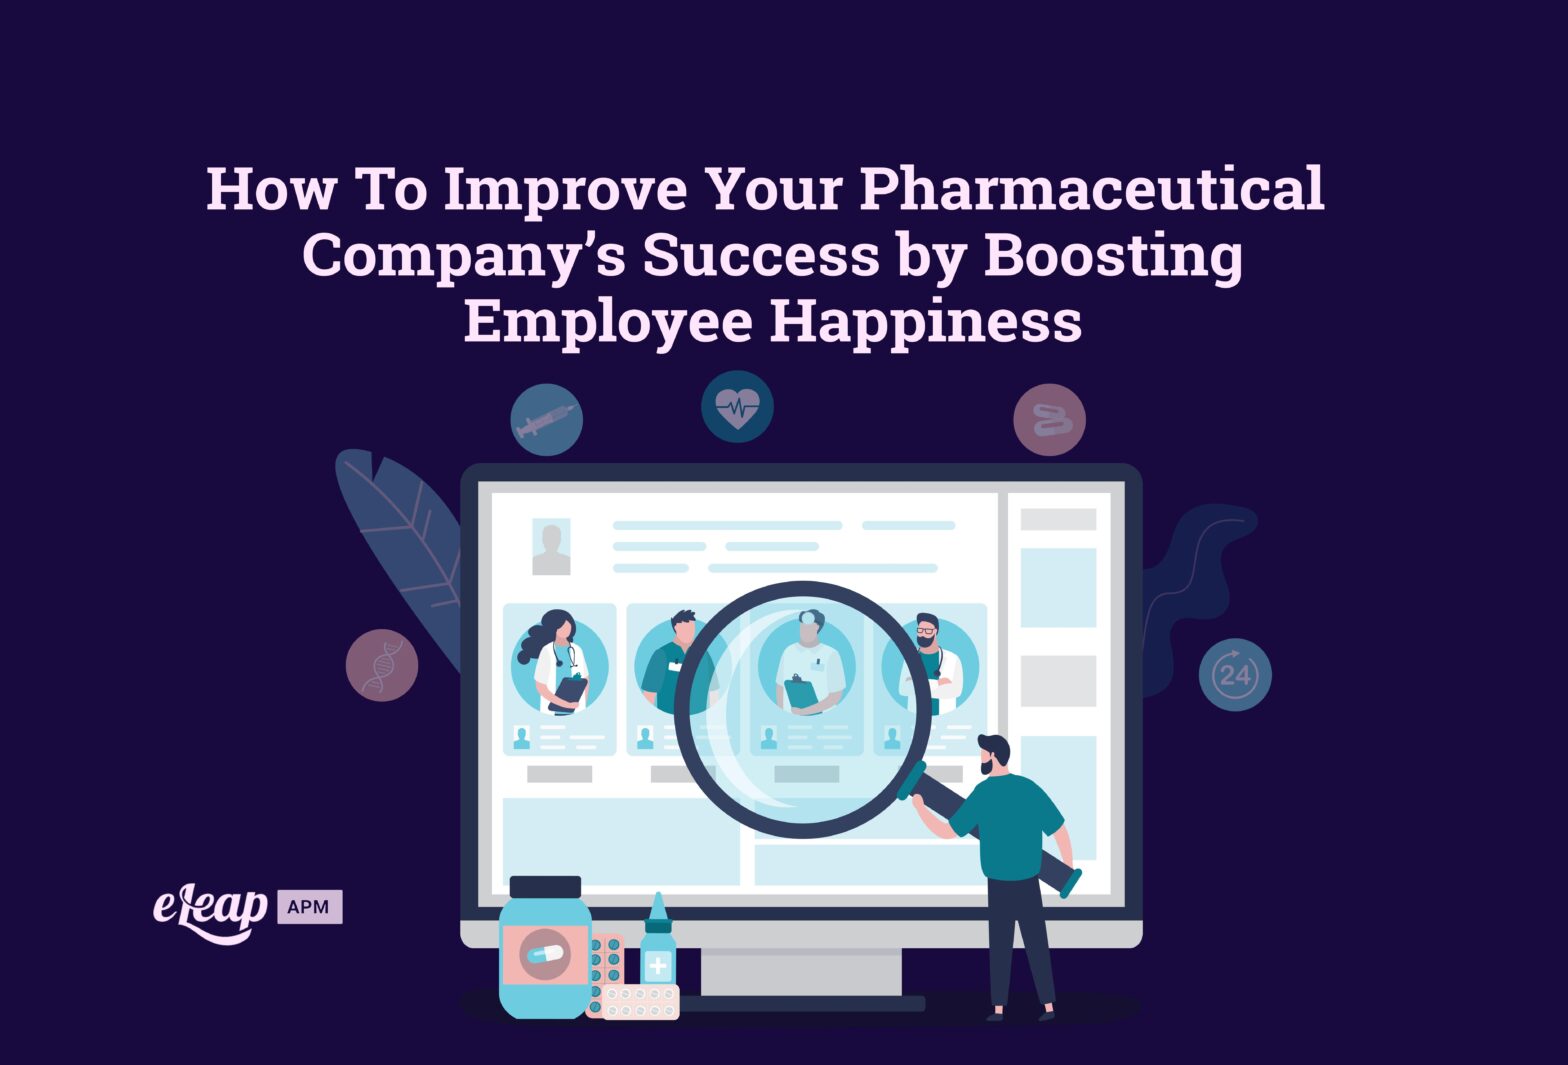 How To Improve Your Pharmaceutical Company’s Success by Boosting Employee Happiness